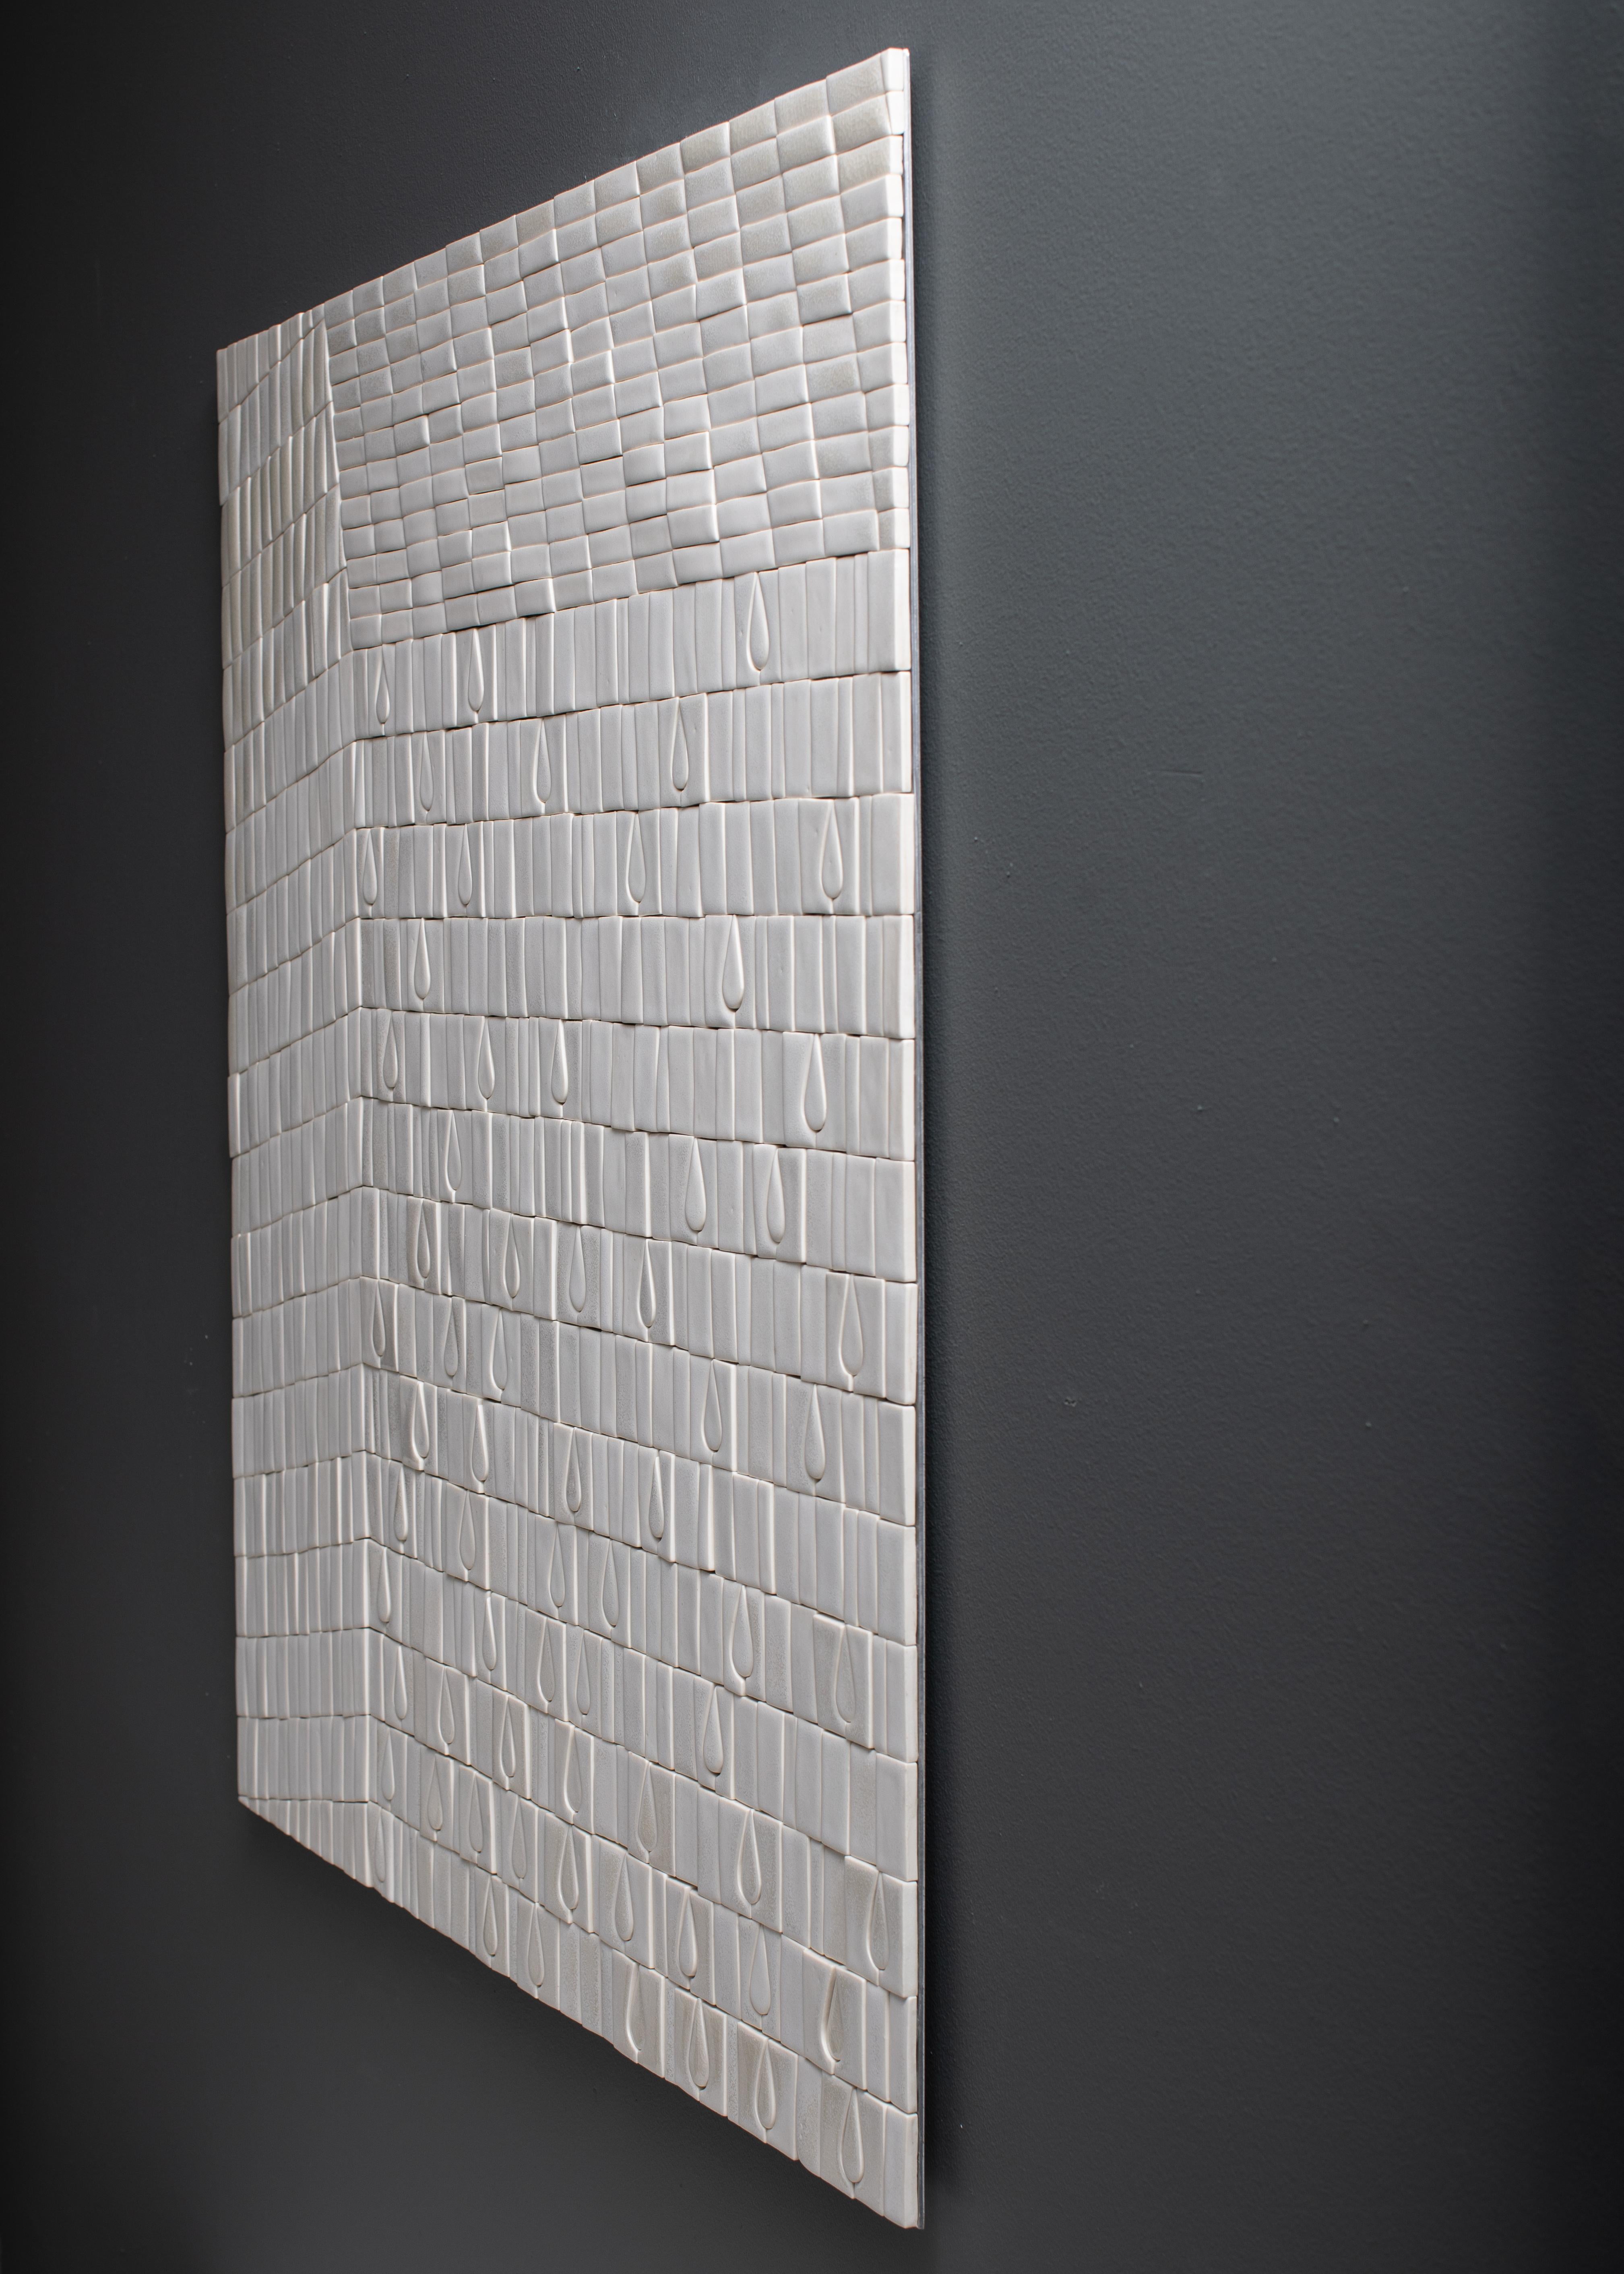 Finnish Hand Built and Glazed Porcelain Wall Piece by Kirsi Kivivirta, In-Stock For Sale